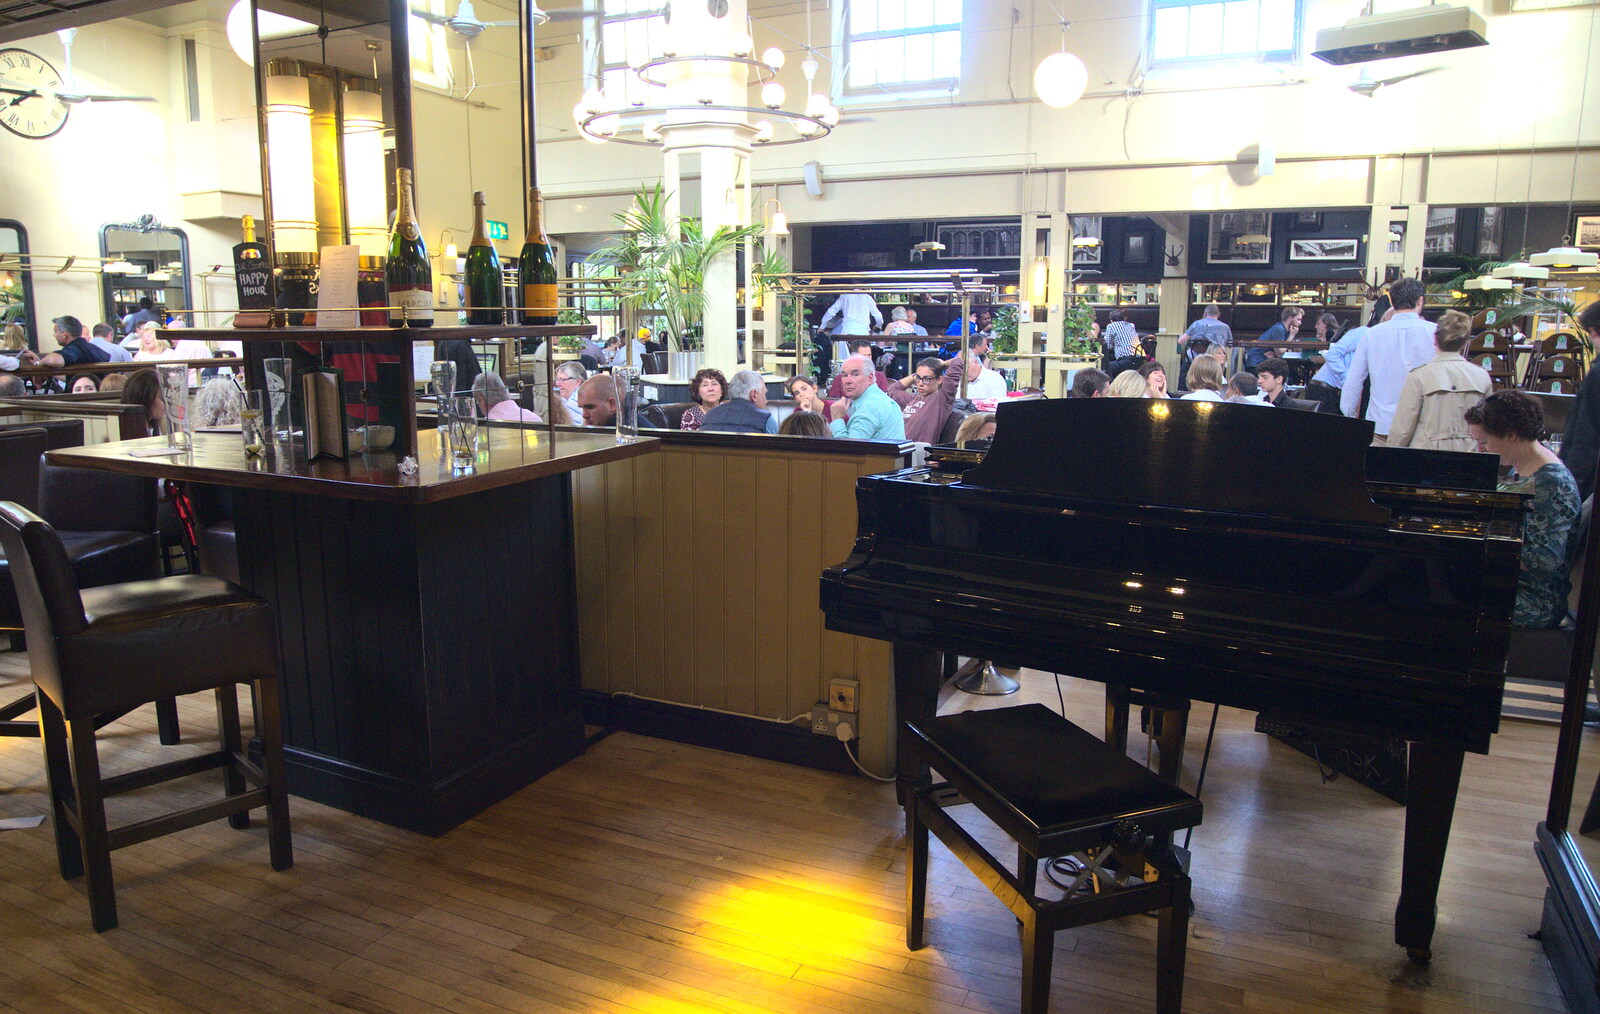 Back in the 'Bridge: an Anniversary, Cambridge - 3rd July 2016: Brown's restaurant, and piano